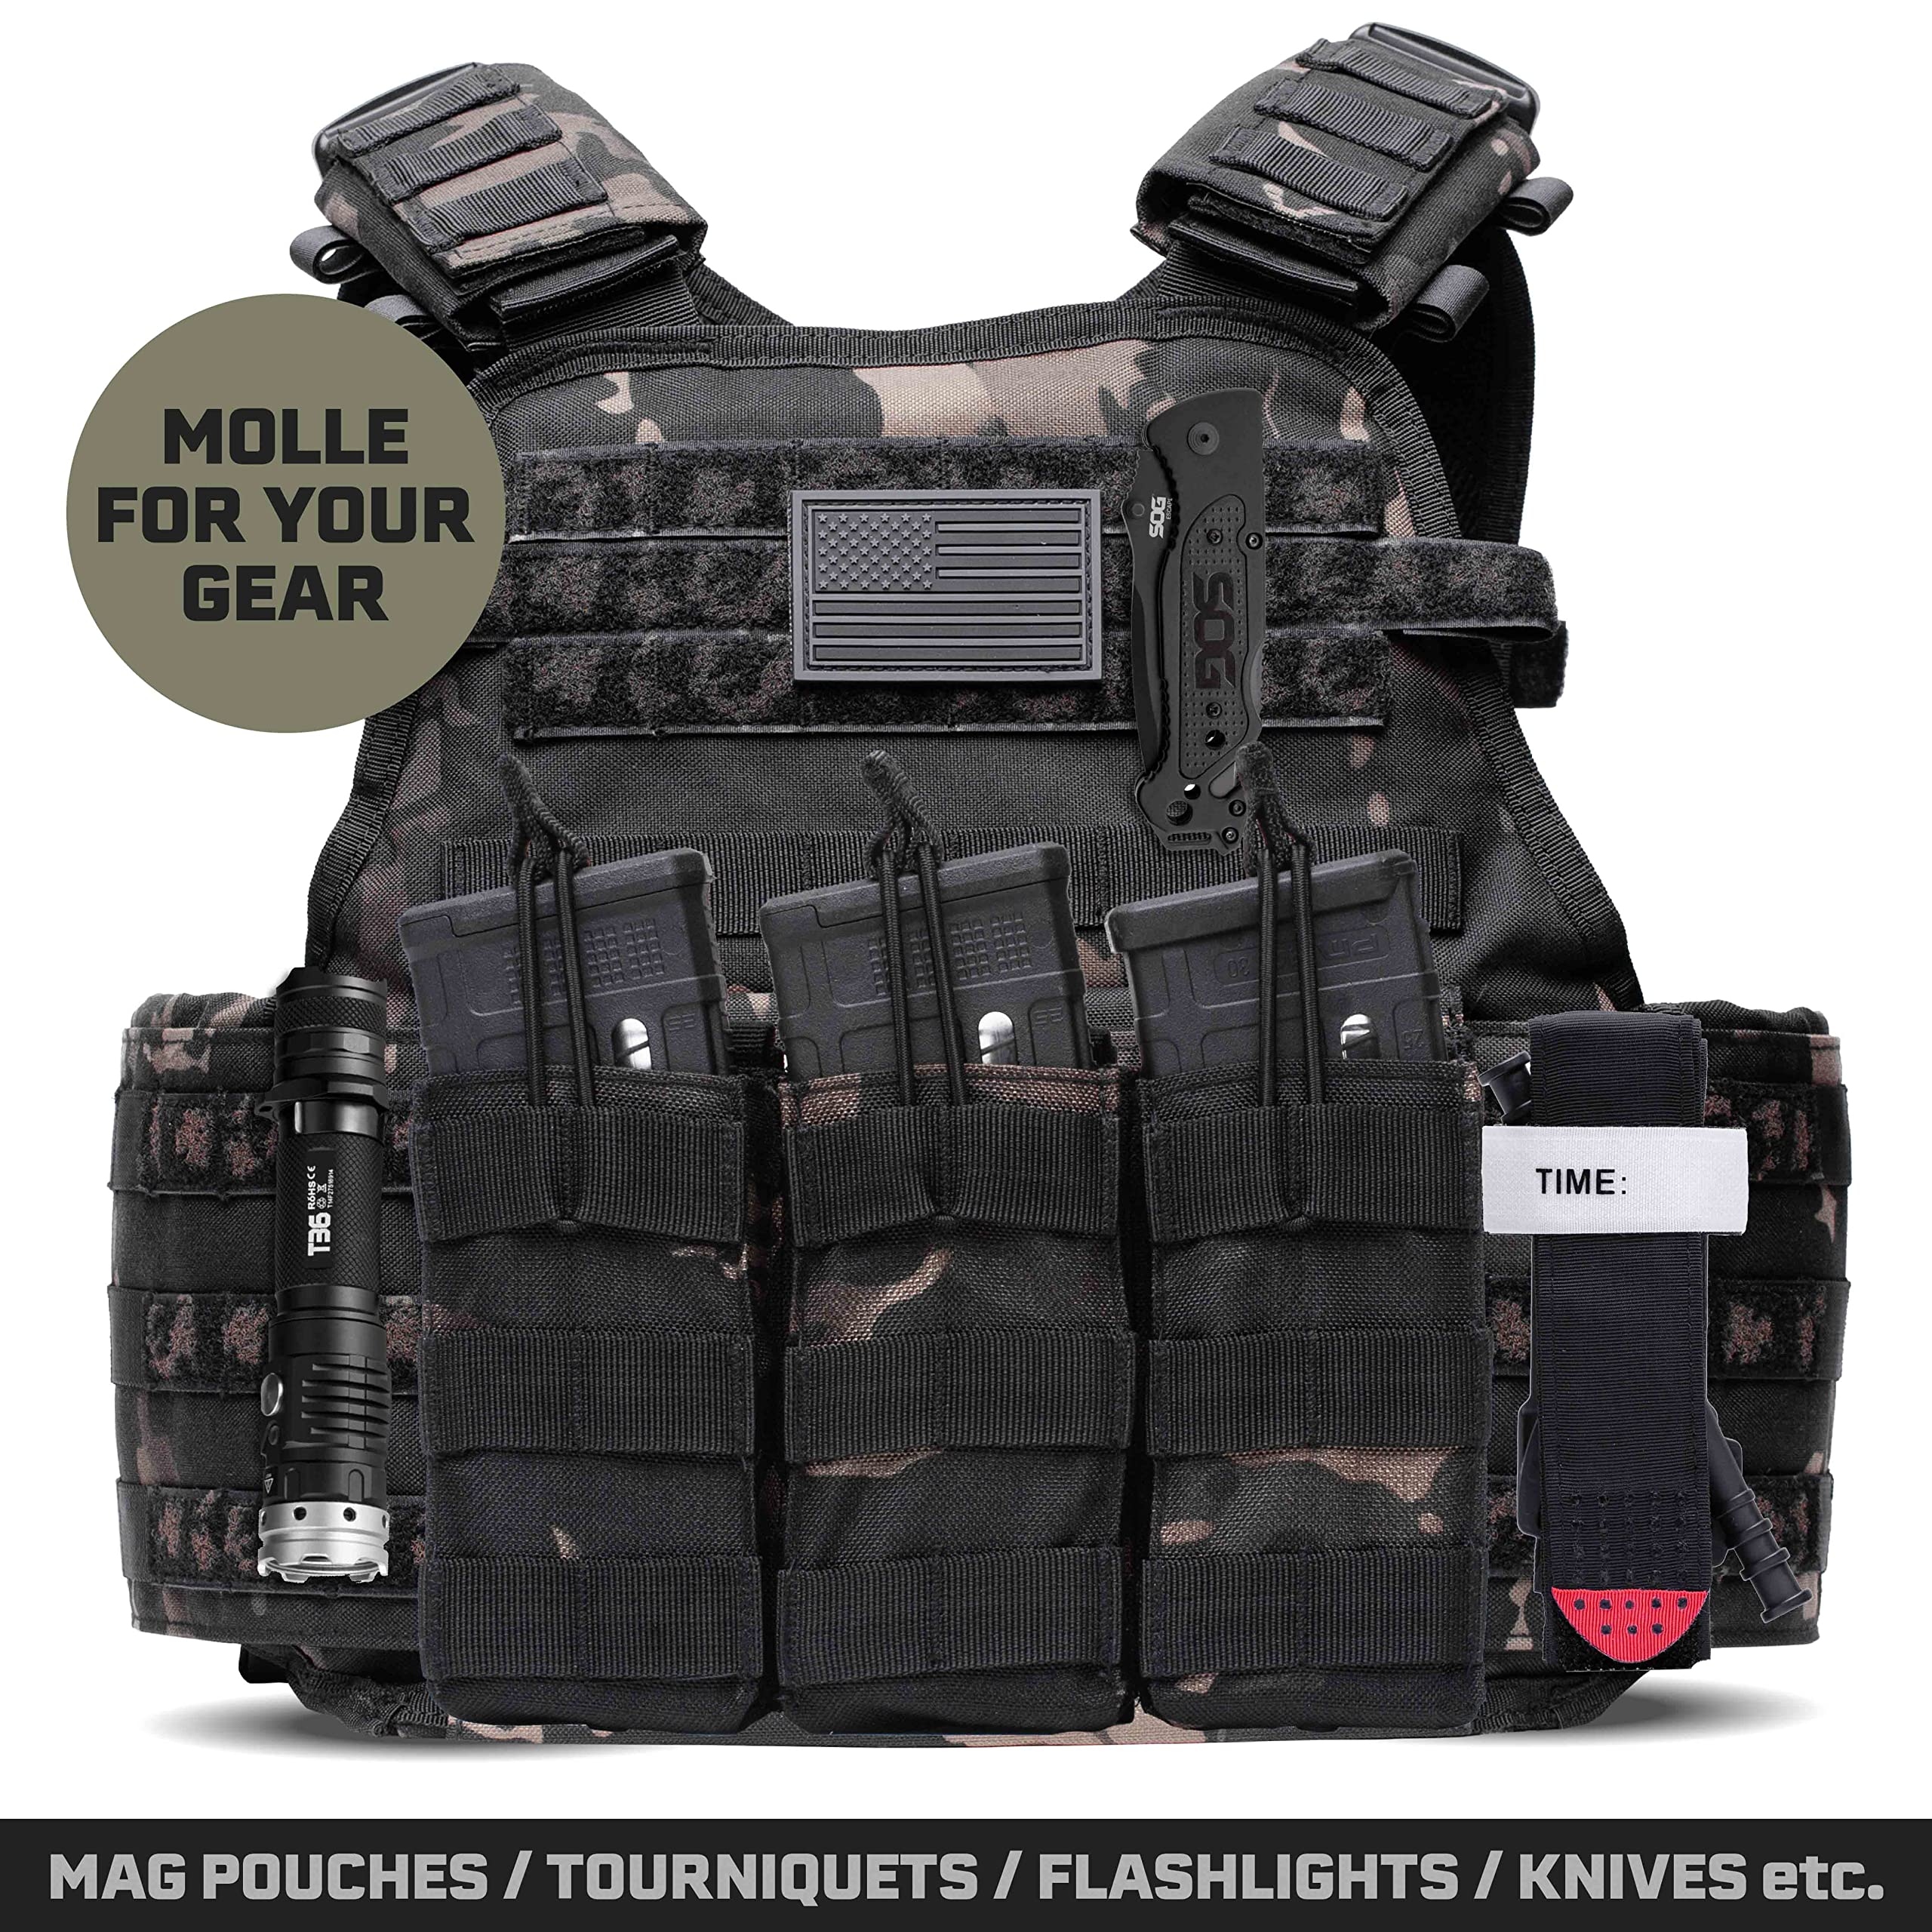 Fully Adjustable Tactical Vest | Combat Veteran Owned Company |Breathable 3D Mesh Liner